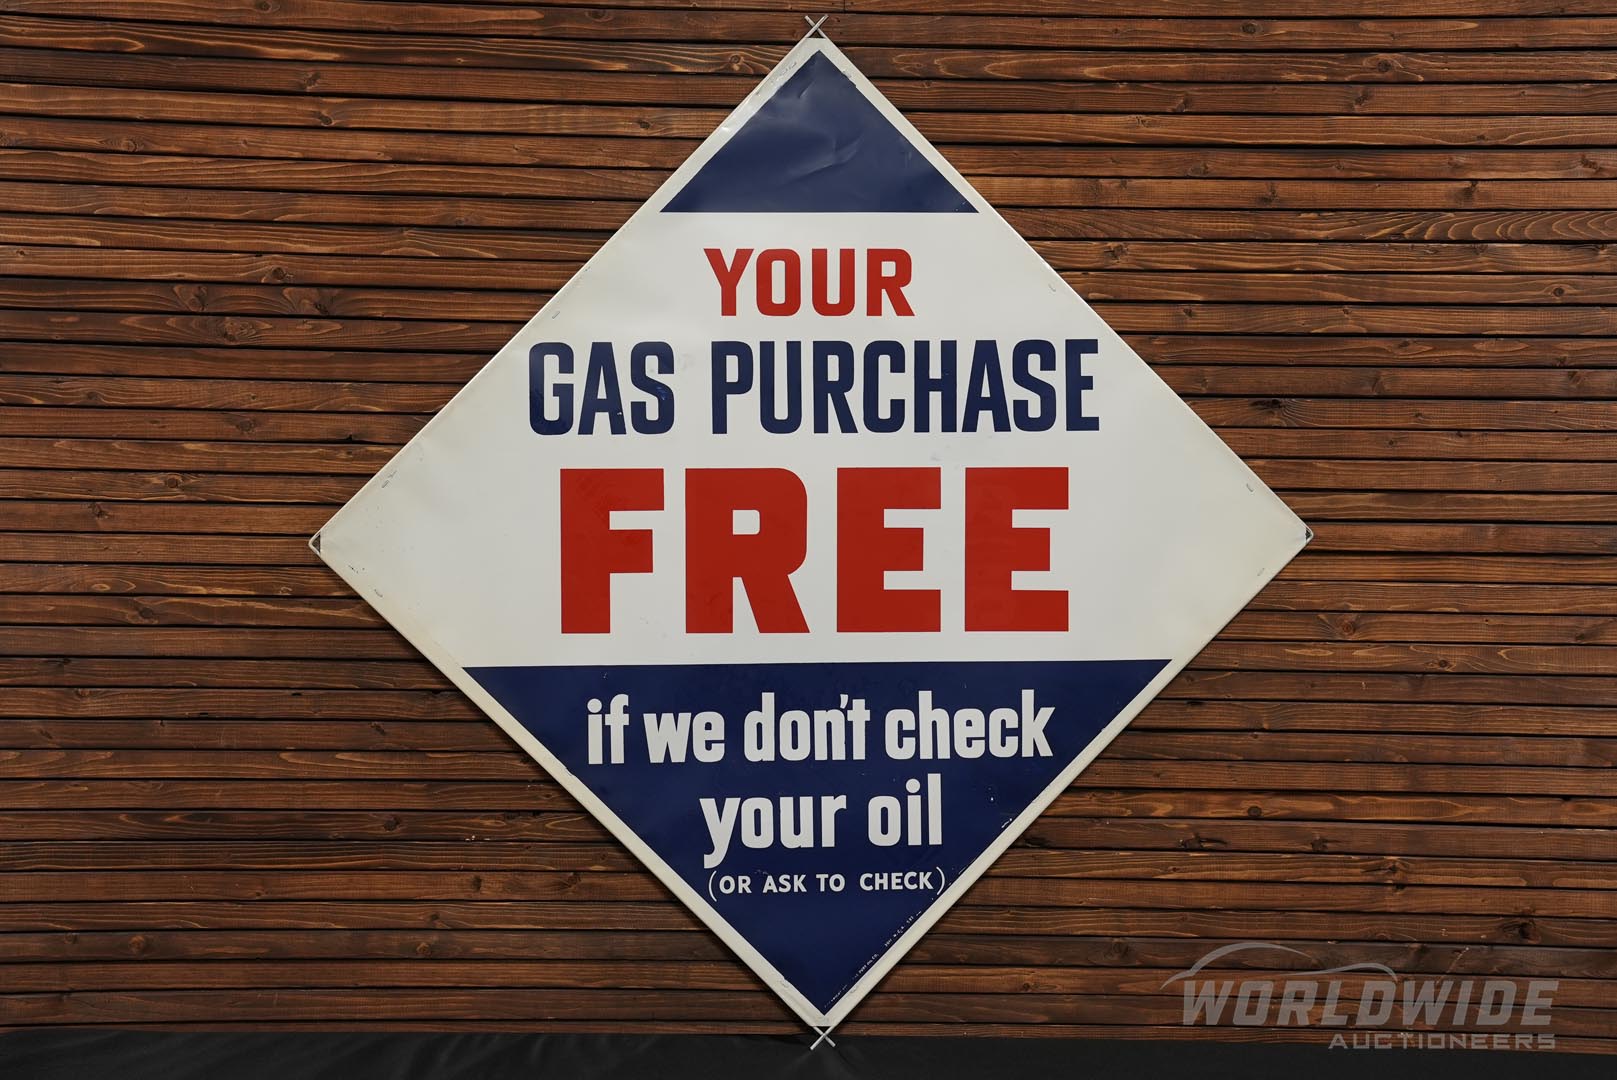 PURE Oil Free Gas Offer Tin Sign